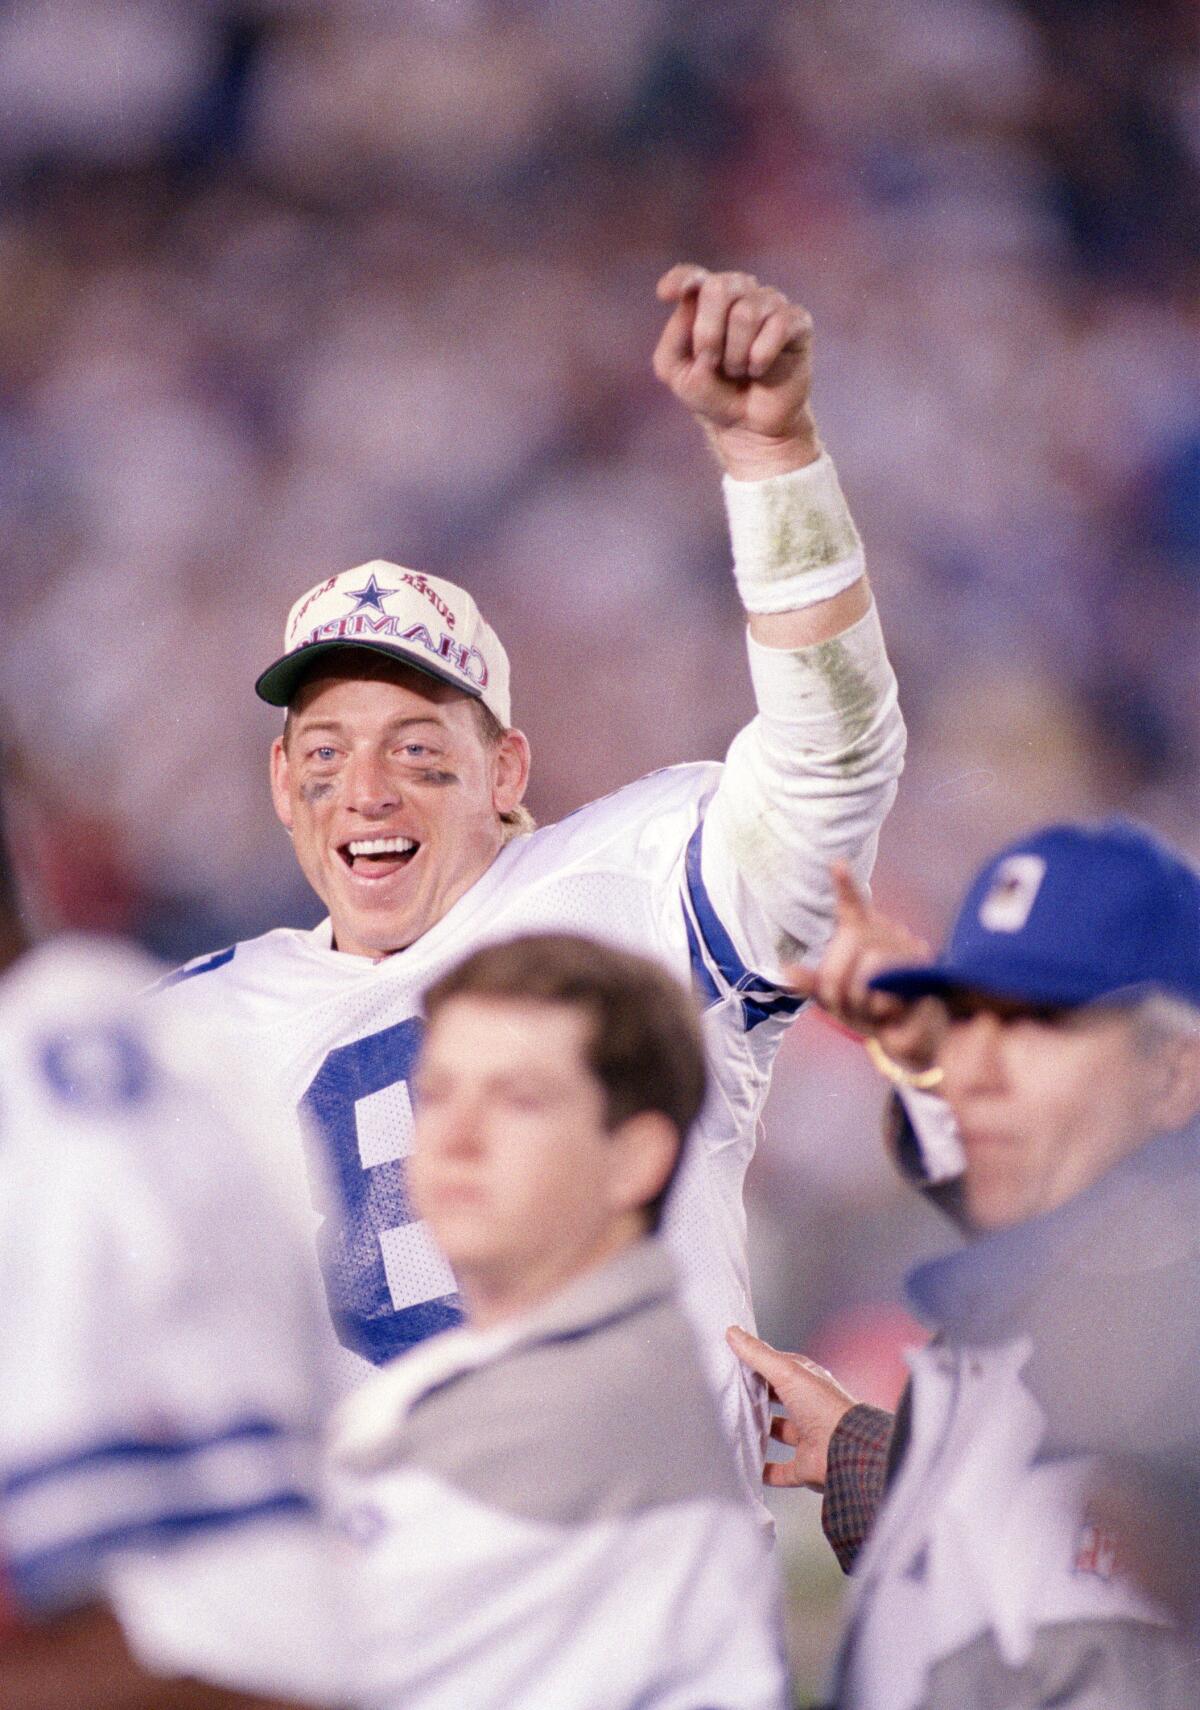 Dallas Cowboys quarterback Troy Aikman smiles and lifts a fist while celebrating at Super Bowl XXVII.